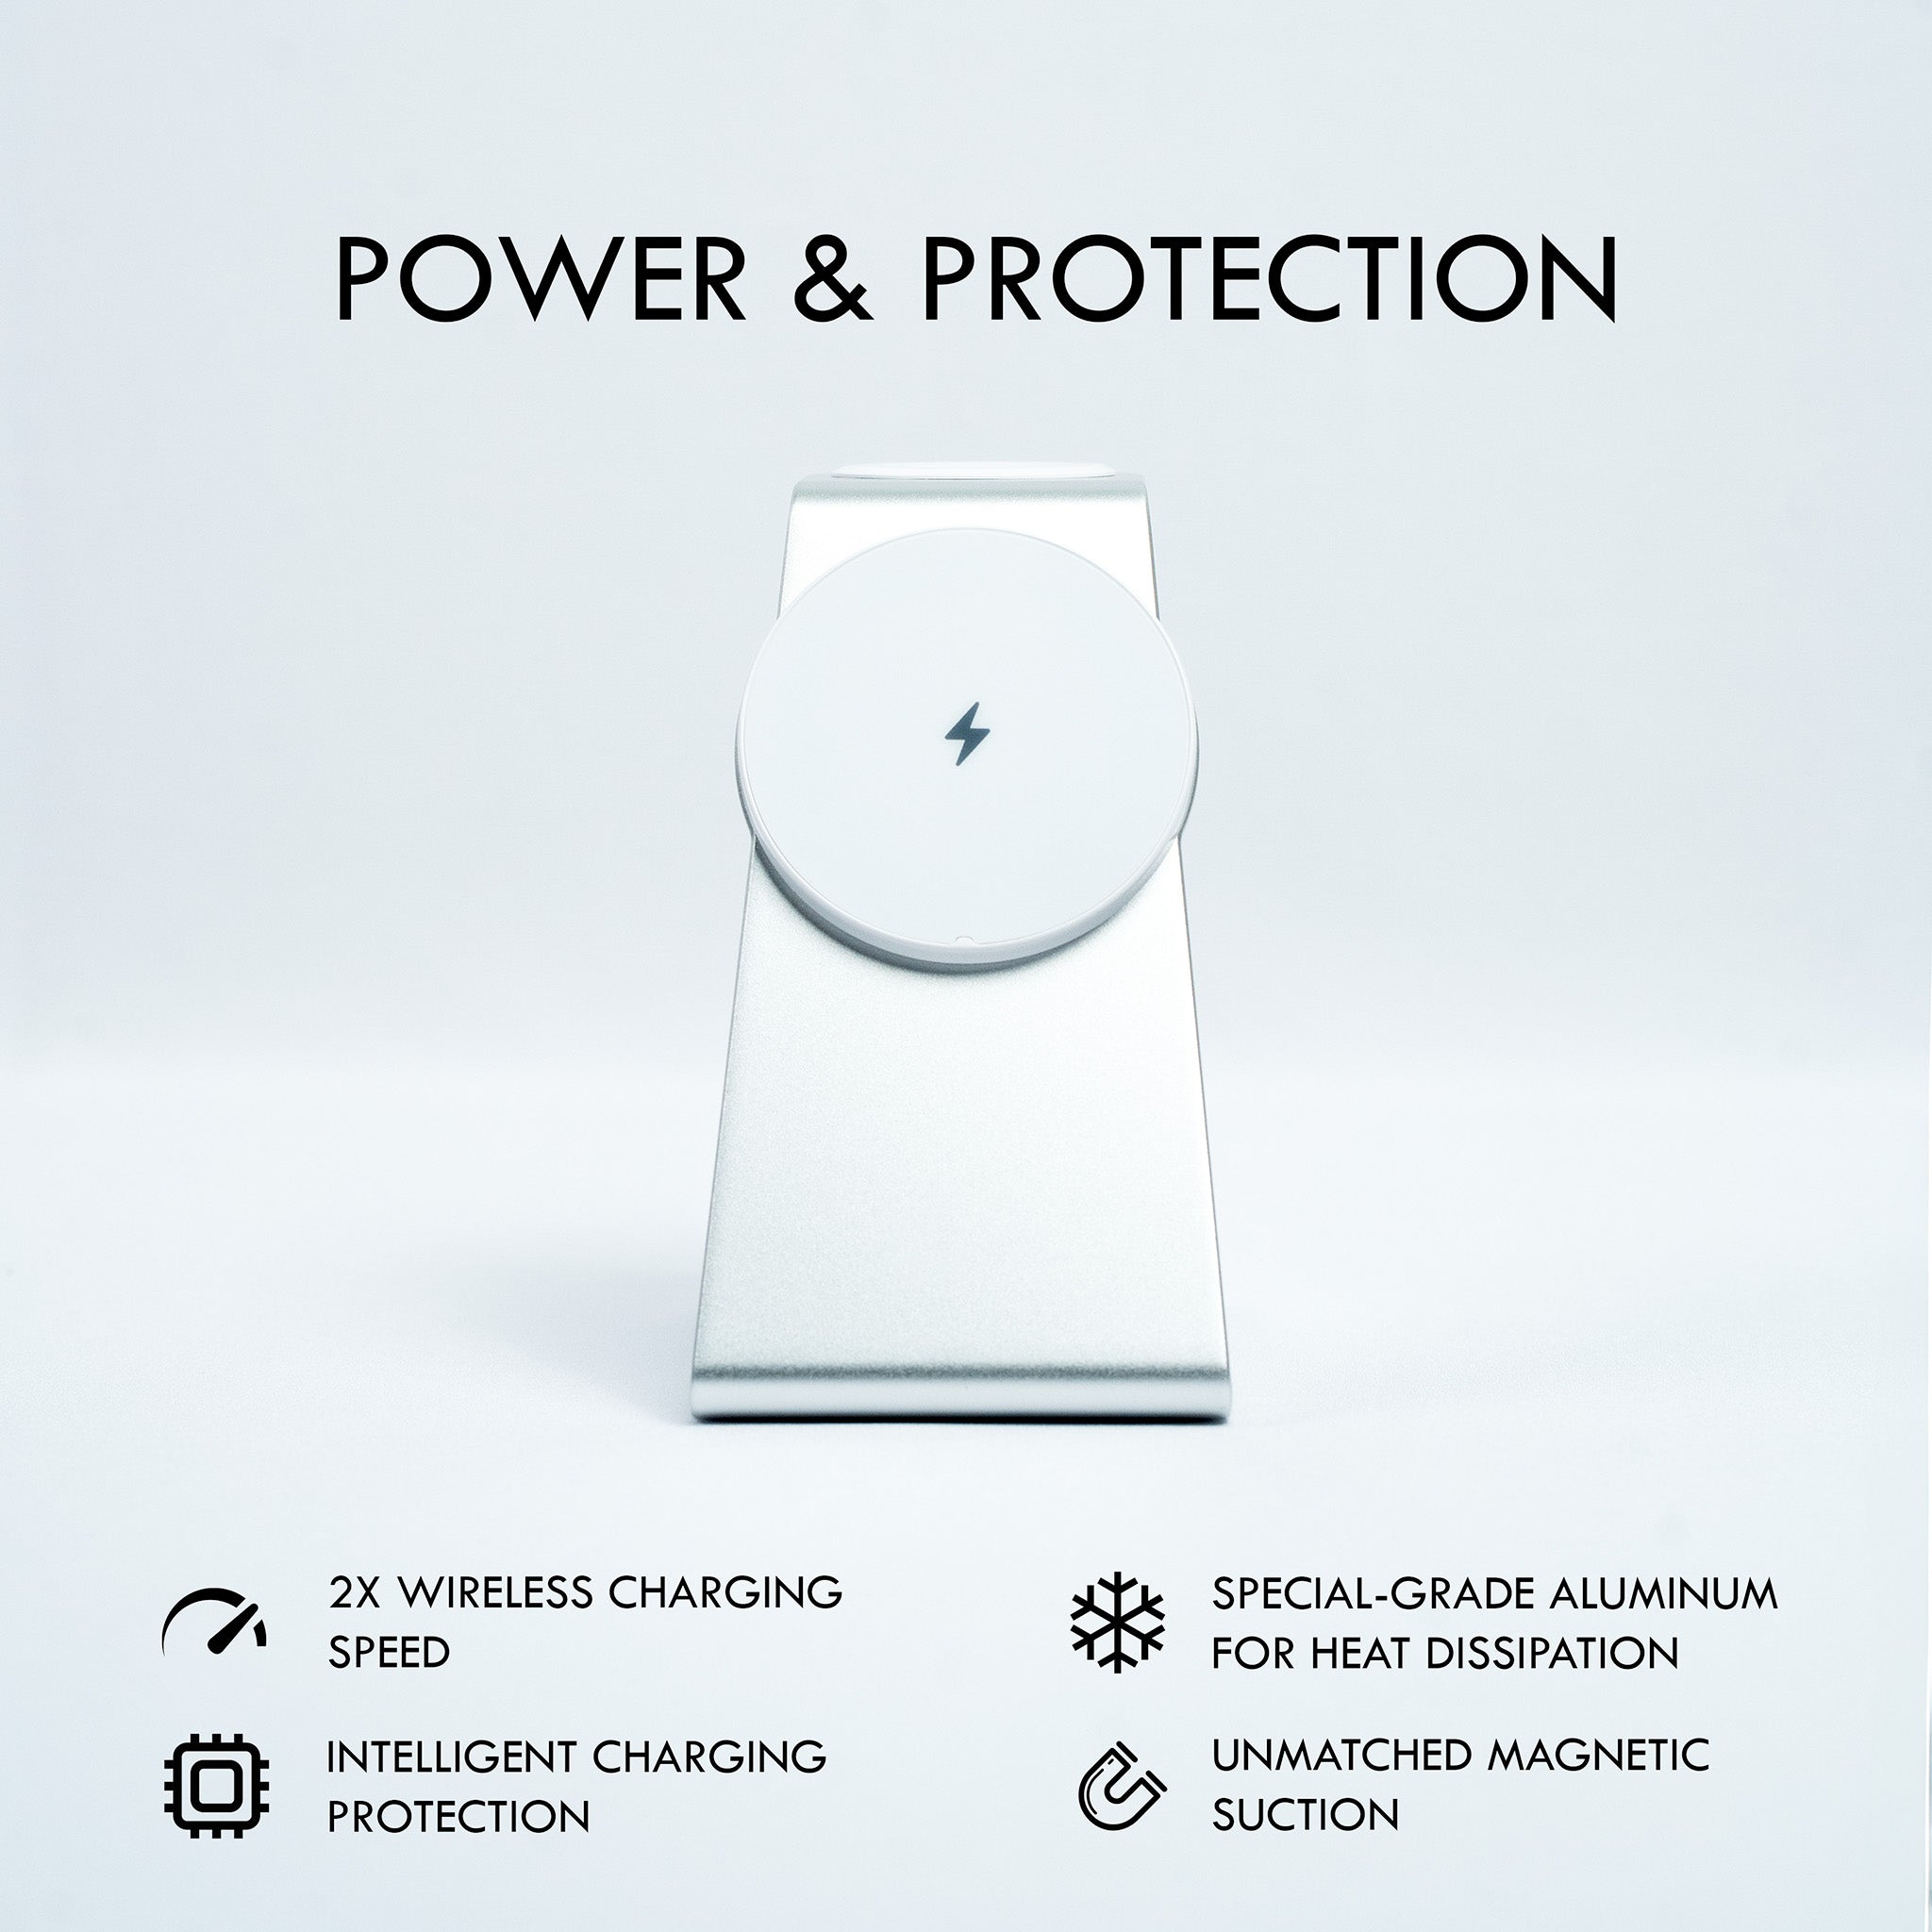 Magnitis MagSafe 3-in-1 Charging Station emphasizing 'Power & Protection' with 2x wireless charging speed, intelligent charging protection, and special-grade aluminum for heat dissipation.